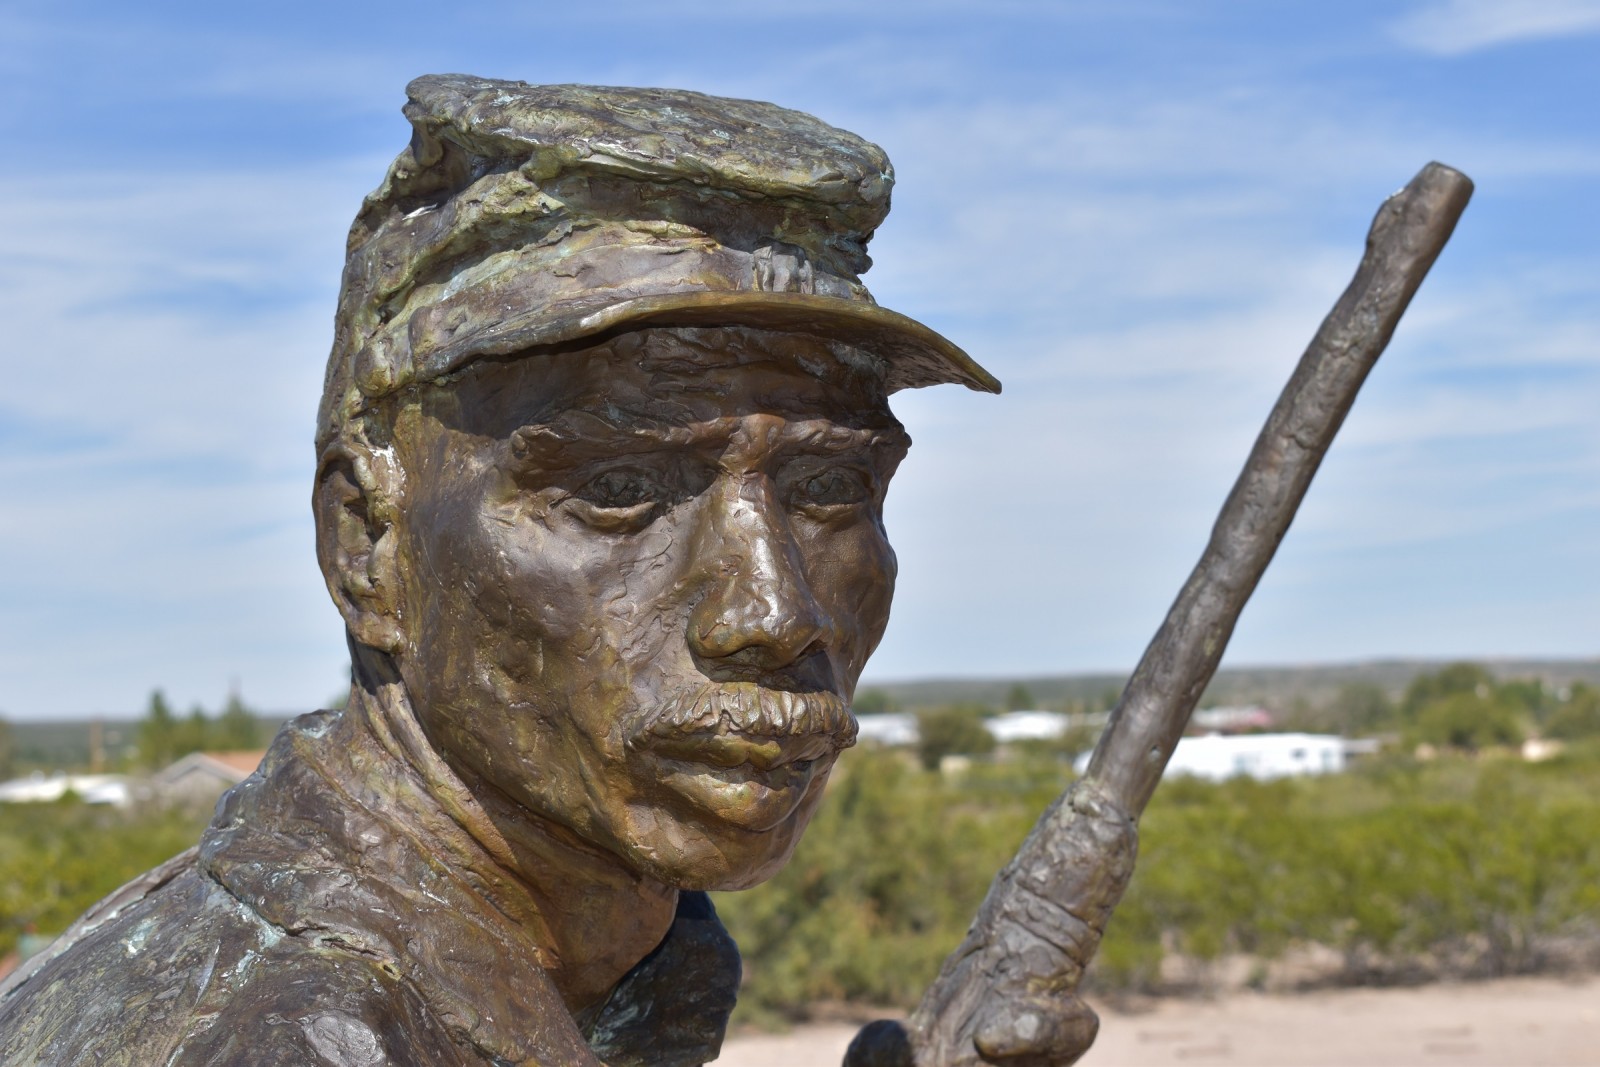 The Sentinel, by artist Sonny Rivera, stands as a commemoration to the Buffalo Soldiers that served at Fort Selden and across New Mexico and the American West.